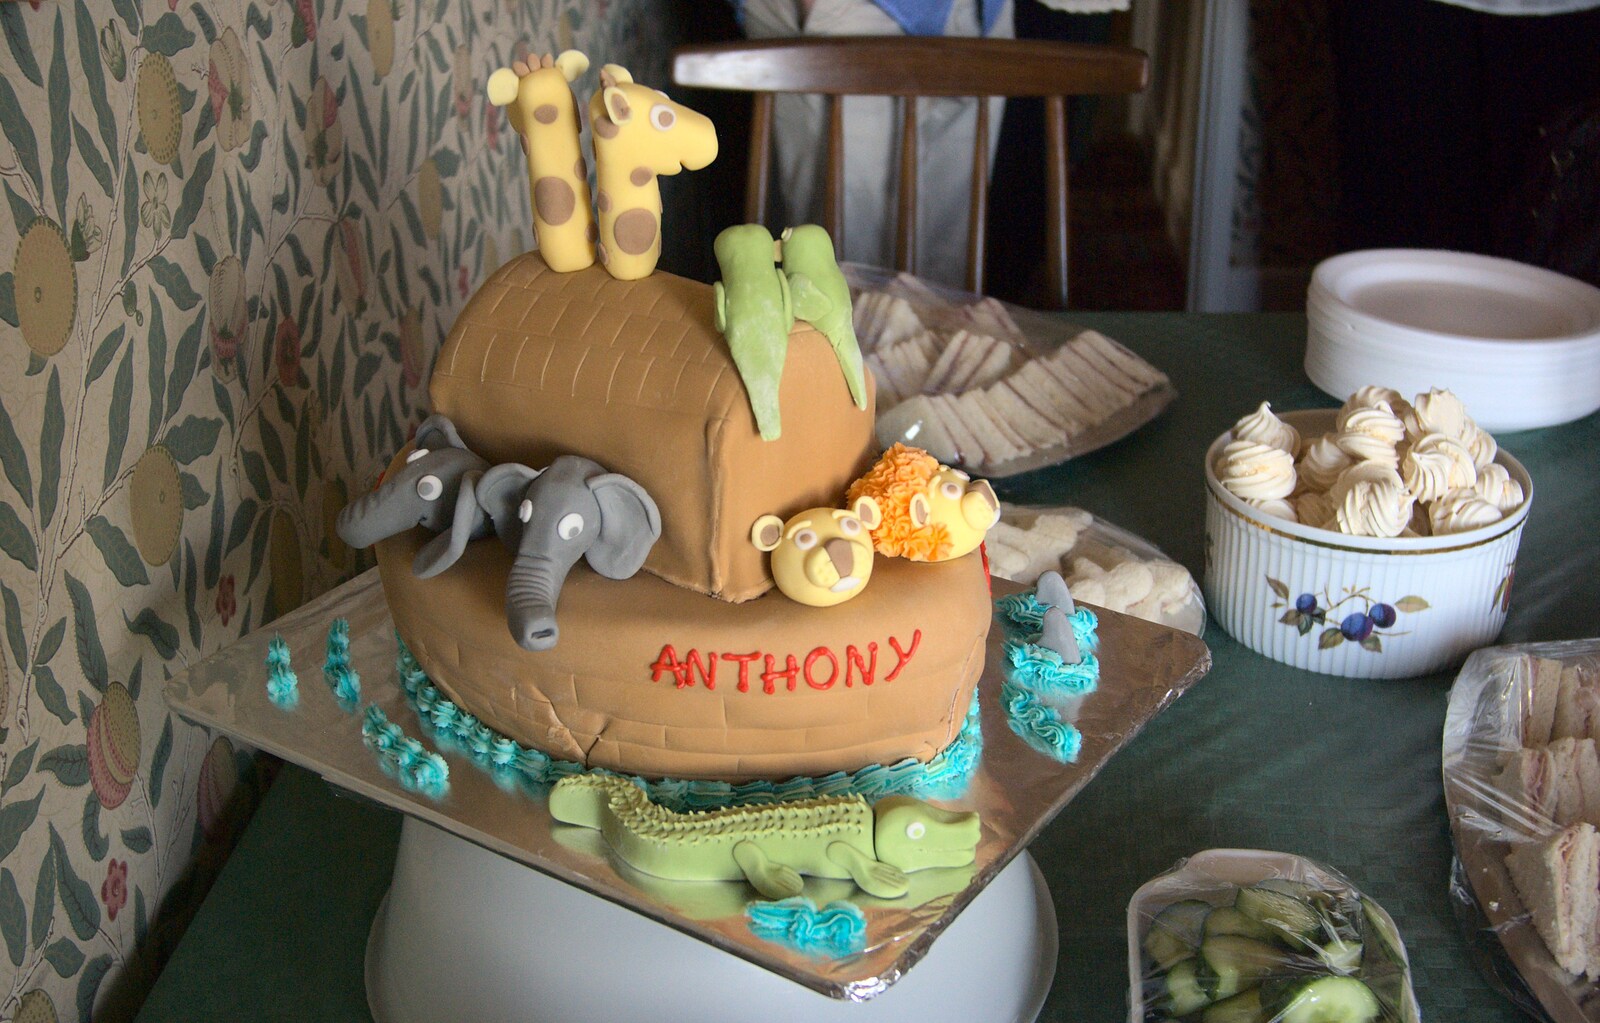 The impressive 'ark' cake from A Christening, Wilford, Northamptonshire - 22nd May 2011